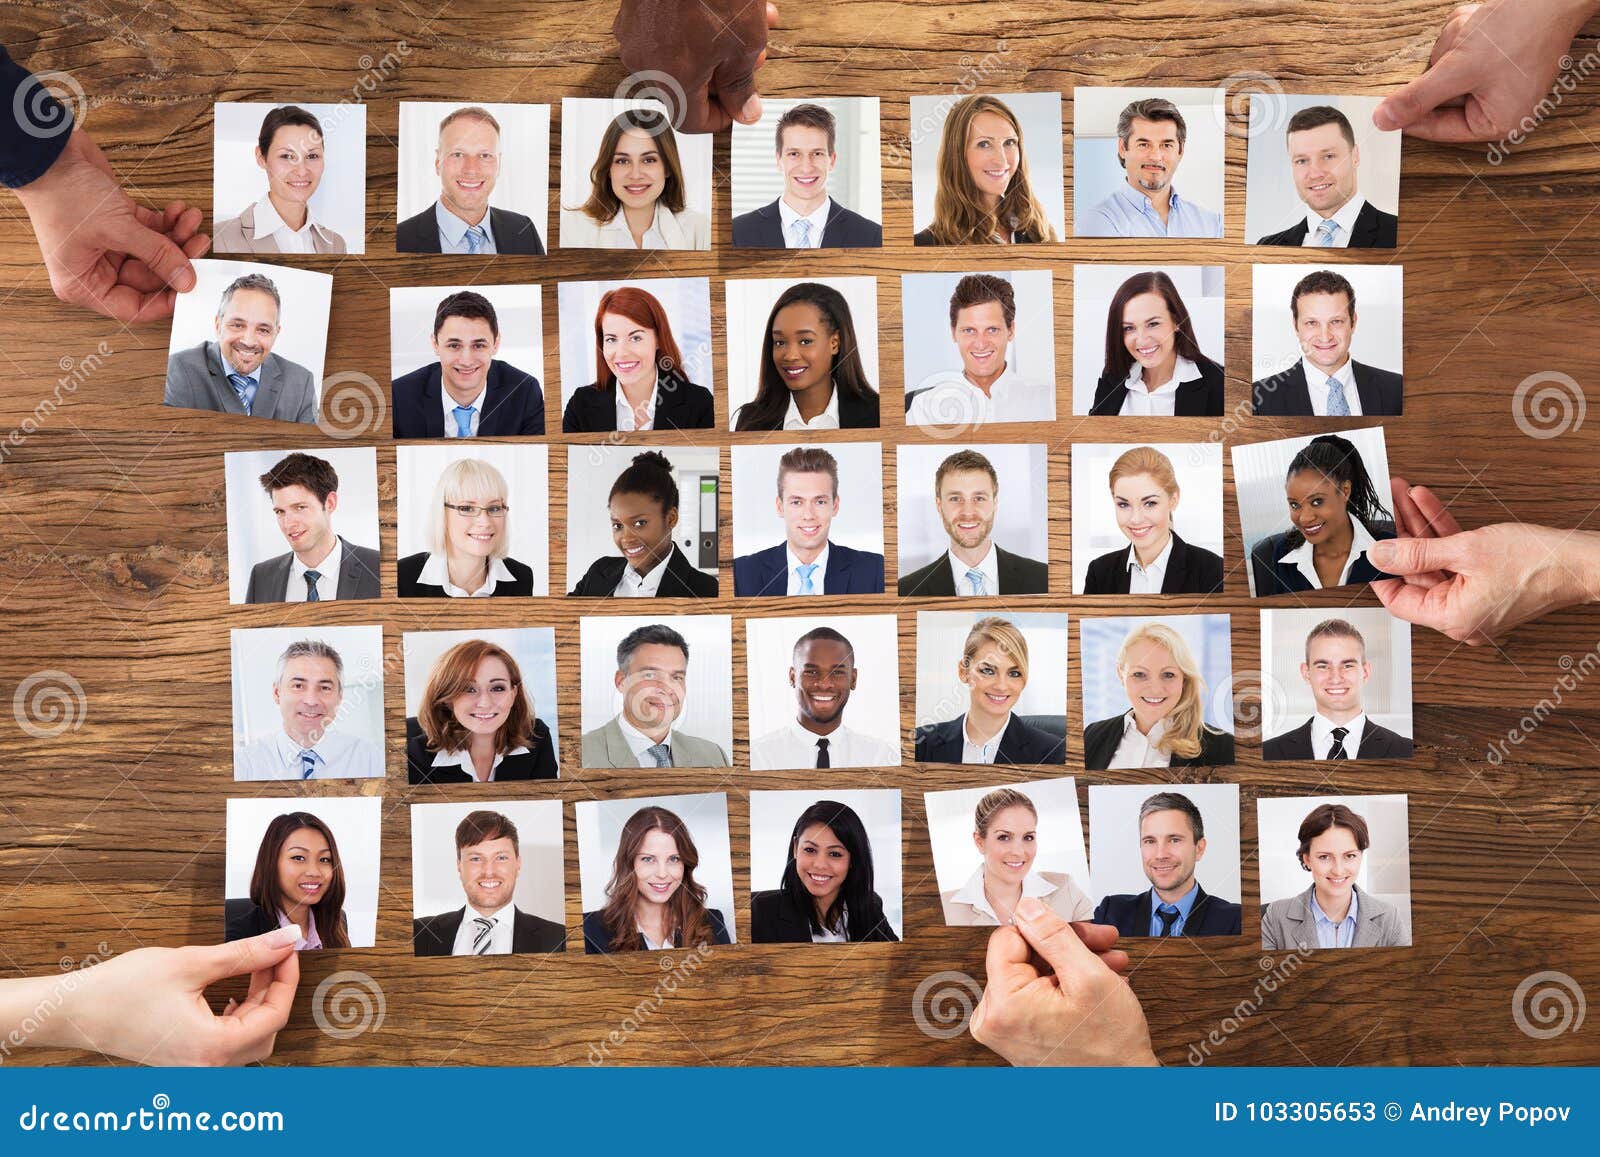 businesspeople selecting the candidate portrait photo